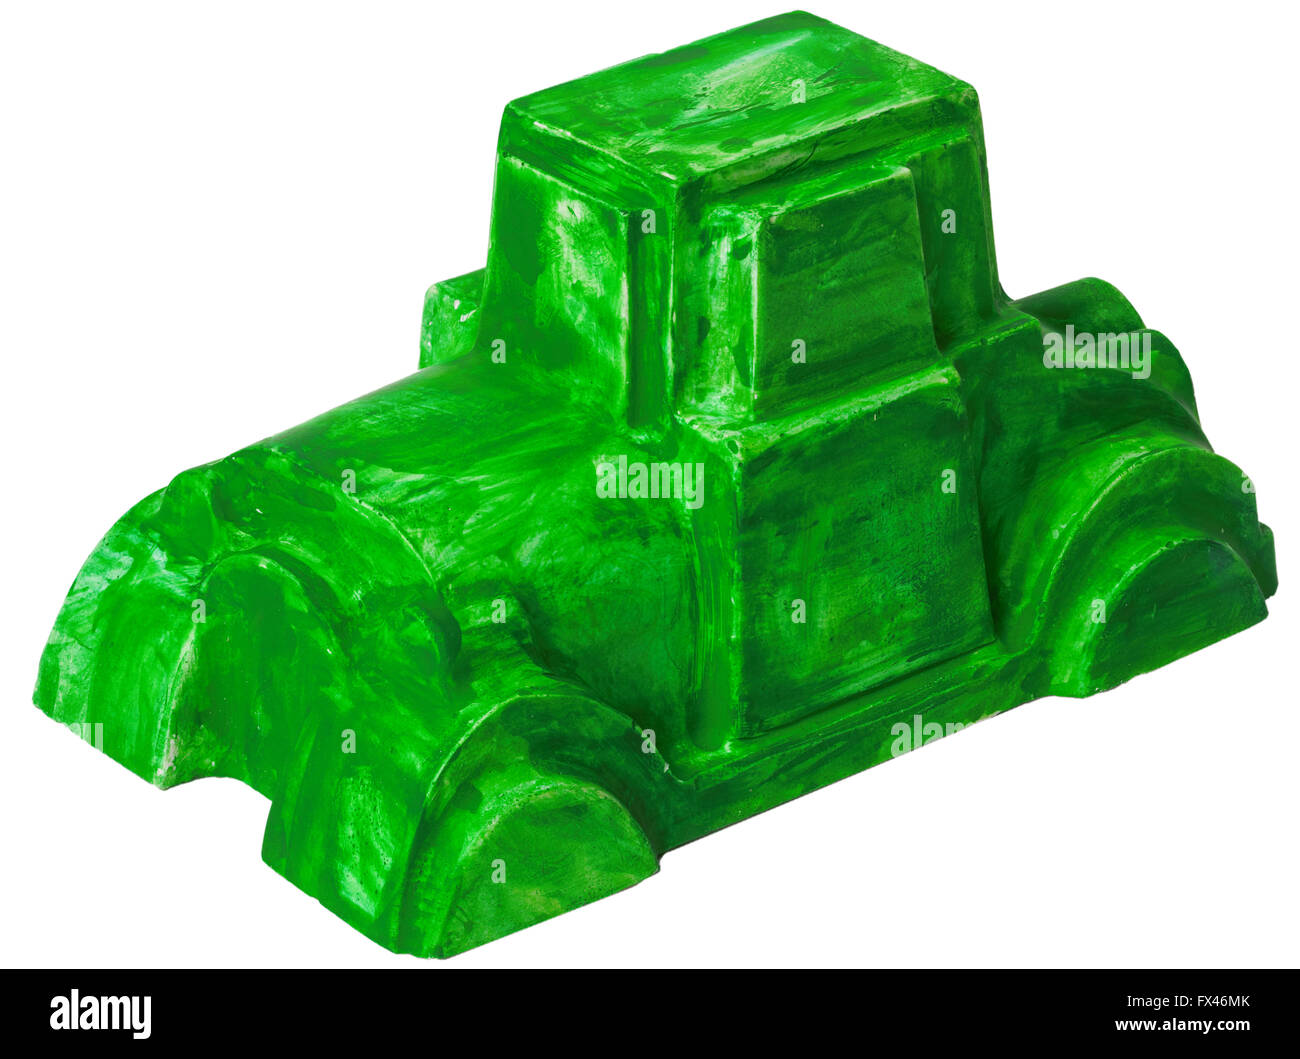 Ceramic plaster figure of green car isolated on white background Stock Photo